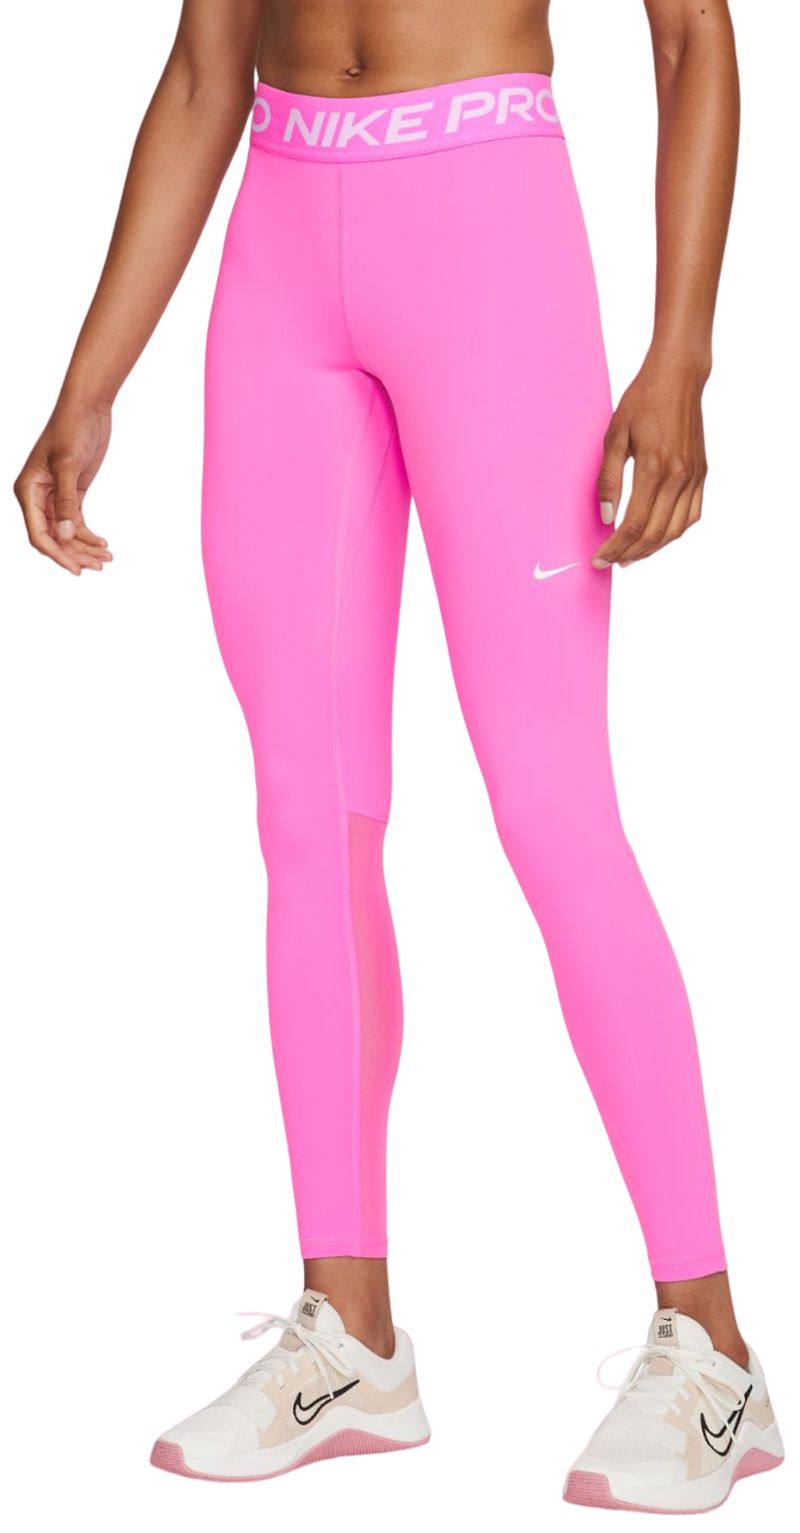 NIKE PRO PRINTED Women's Sports Gym Tights S - SMALL Gym Pink Running  CJ3584-679 £39.95 - PicClick UK